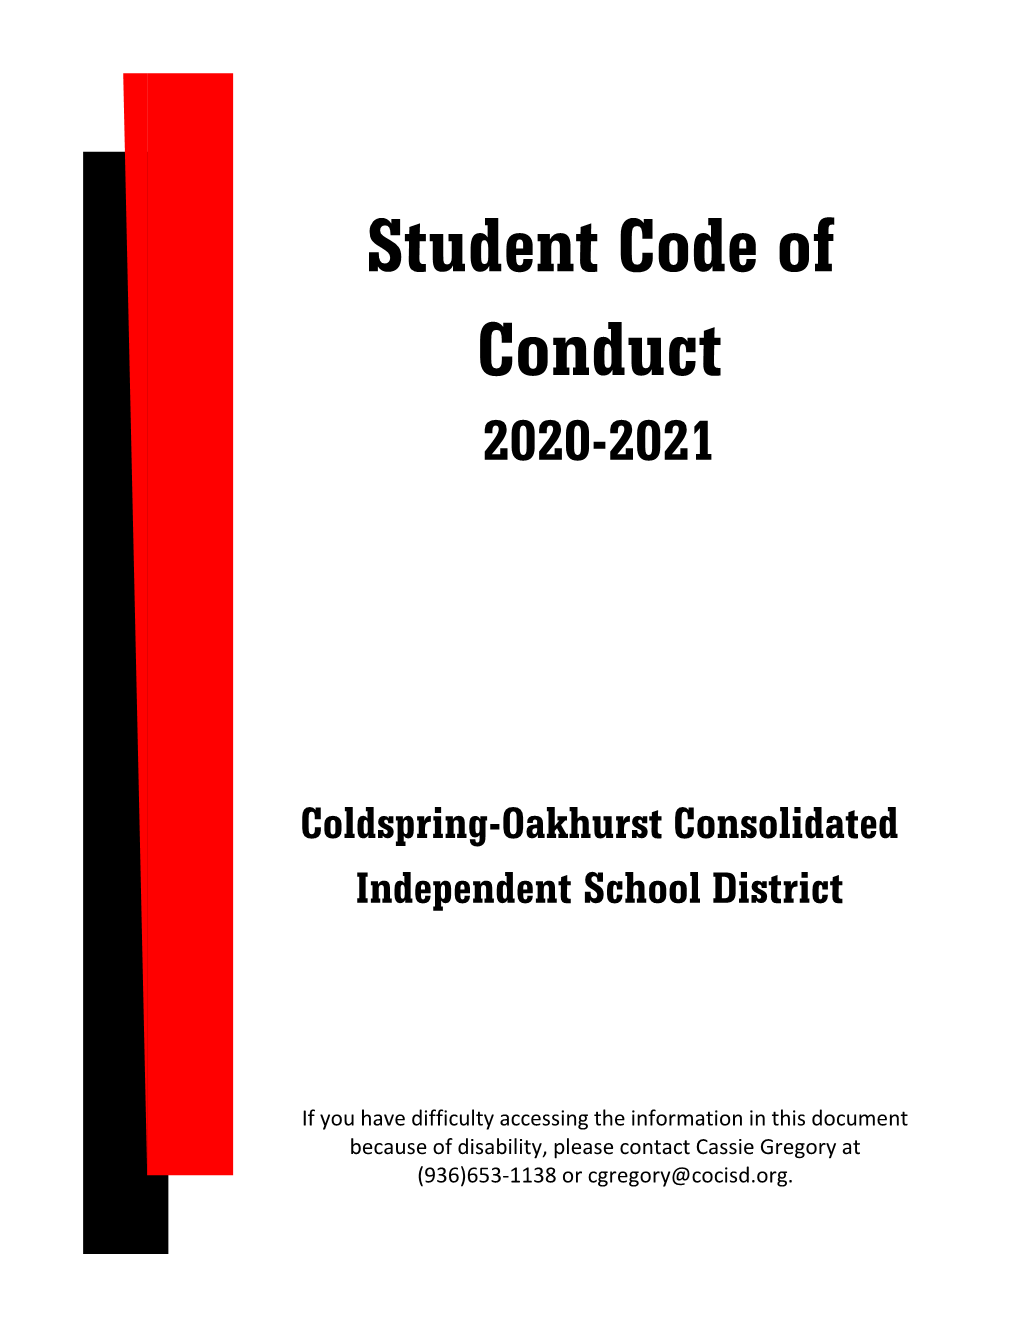 Student Code of Conduct 2020-2021